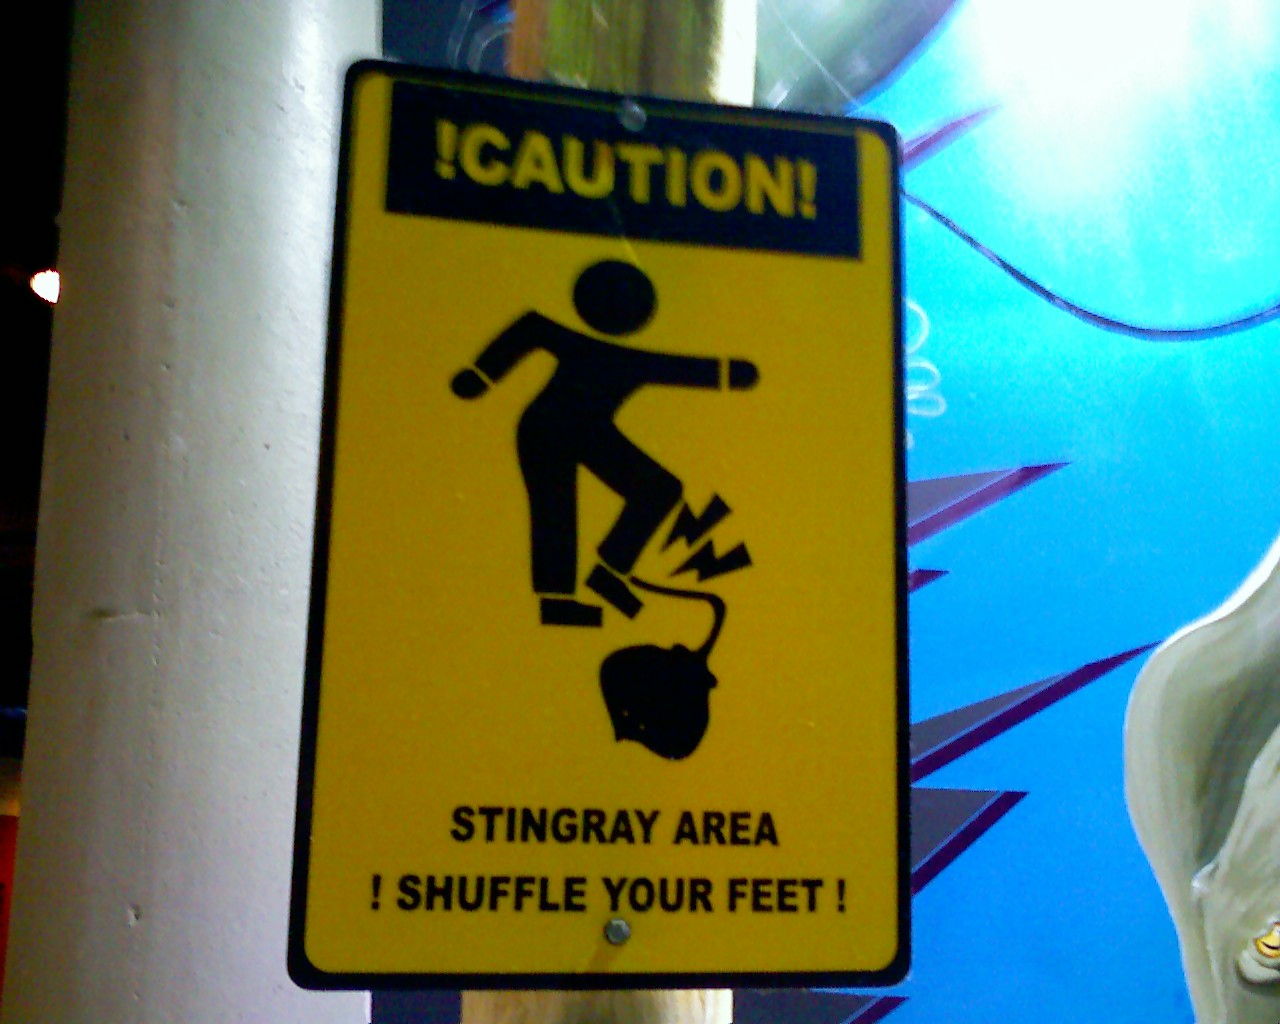 Maybe Steve Irwin could have used this sign!